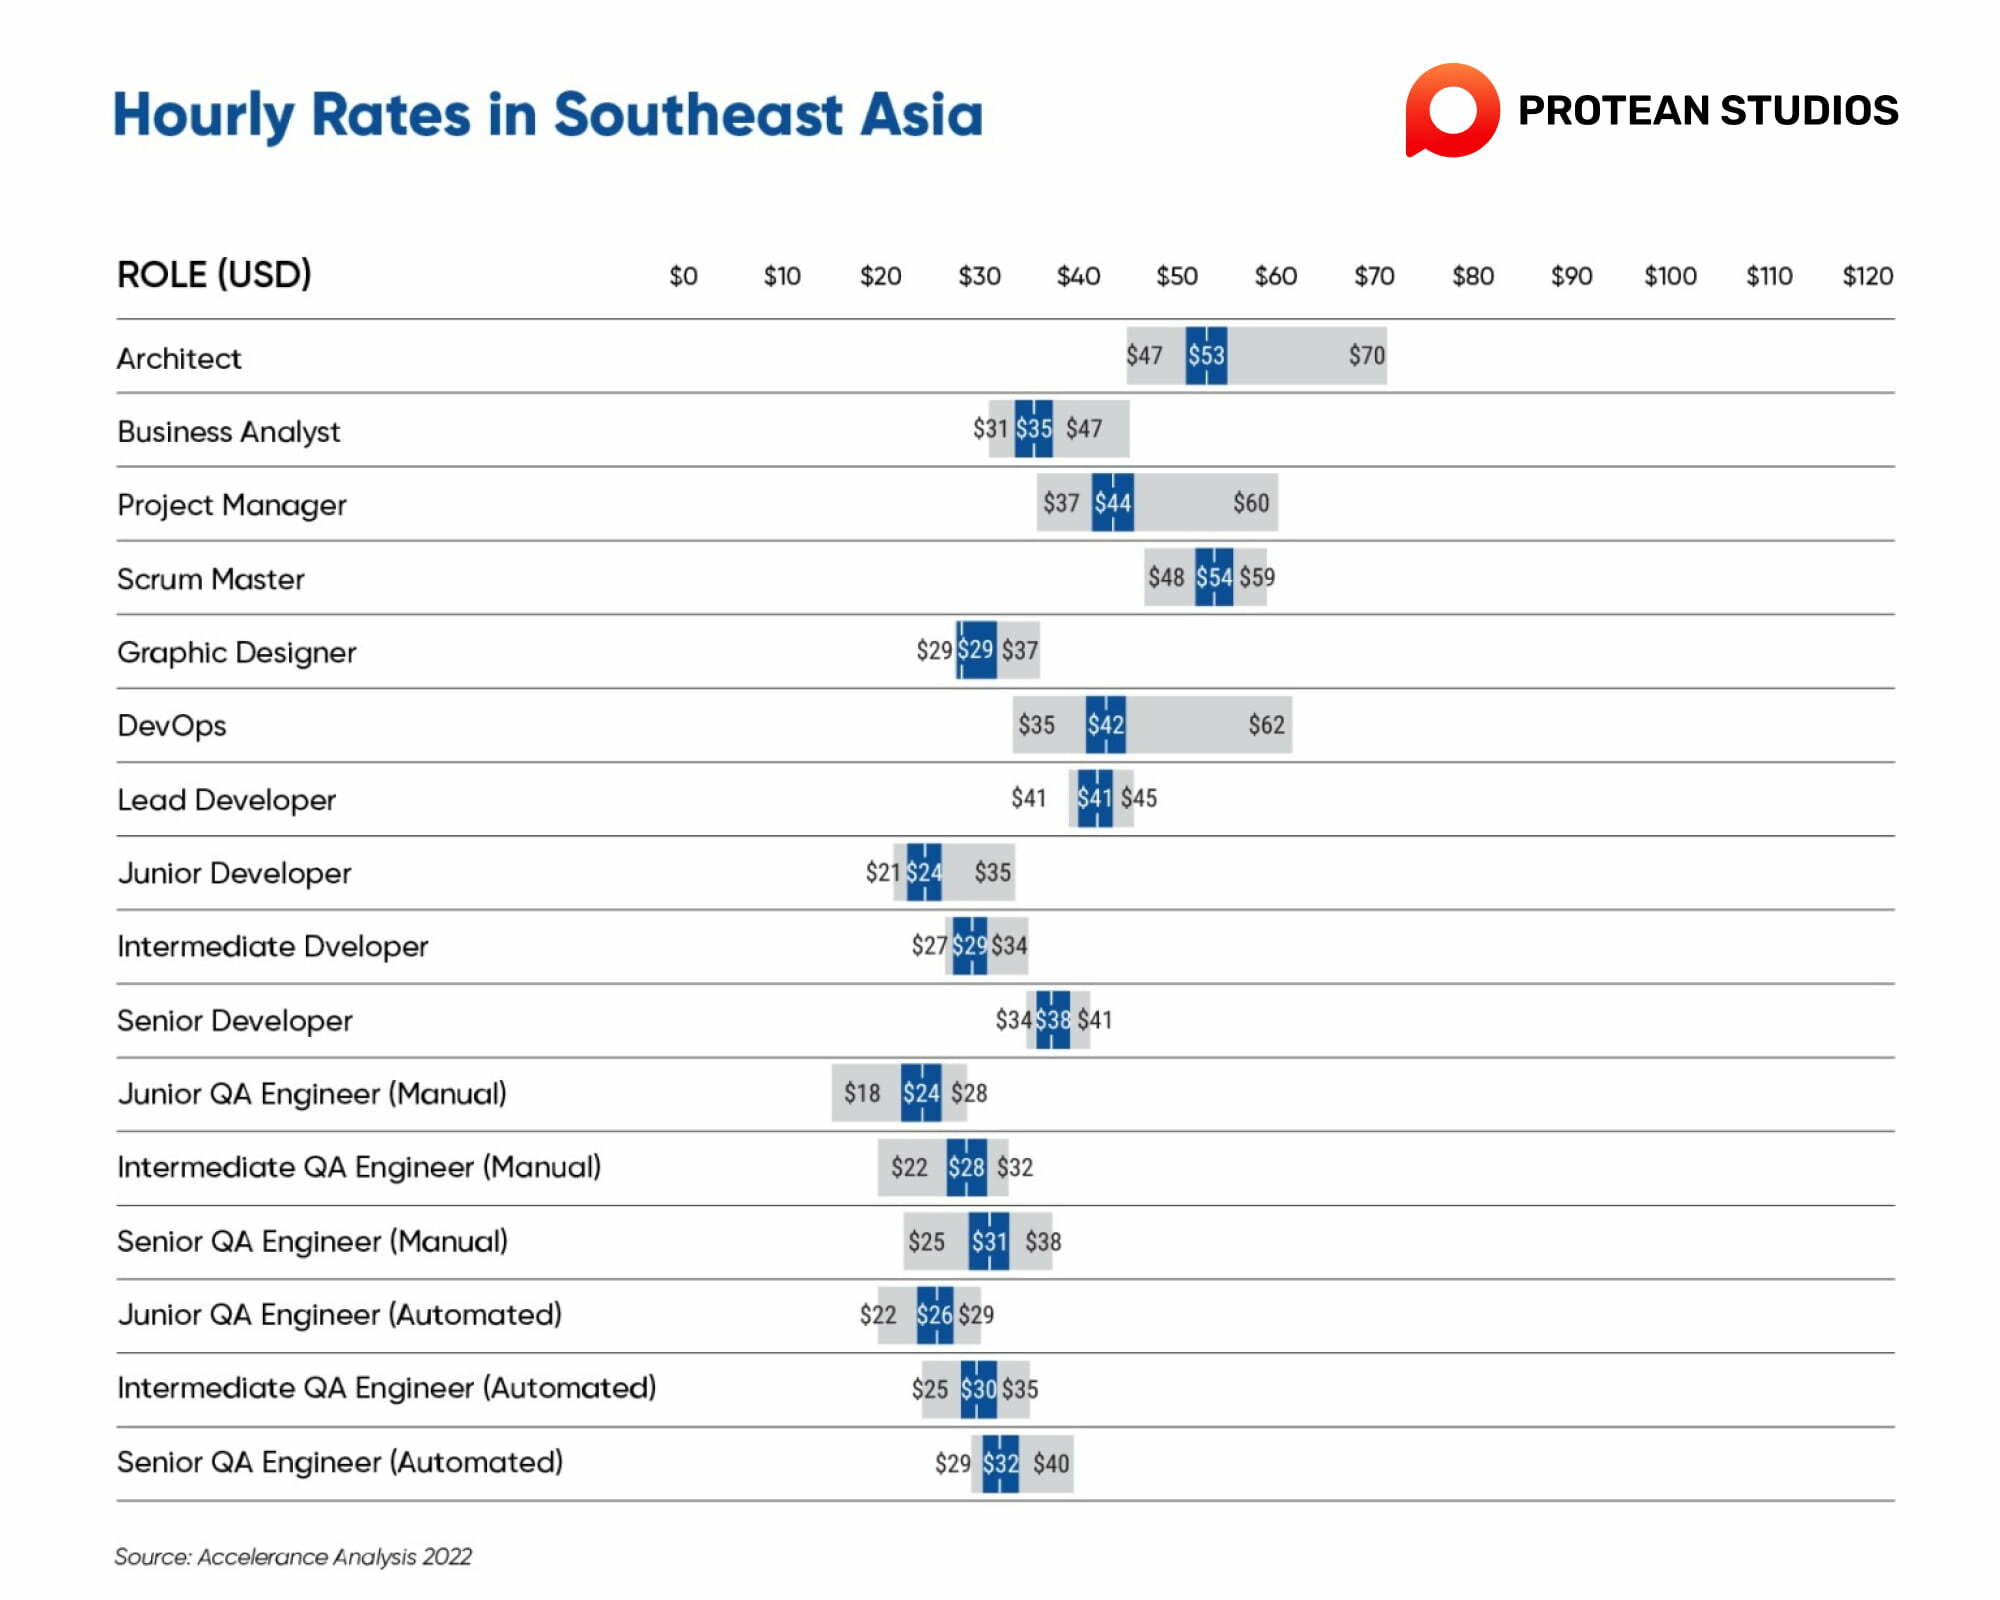 Offshore outsourcing rates in Southeast Asia, according to the 2023 Global Software Outsourcing Trends and Rates Guide